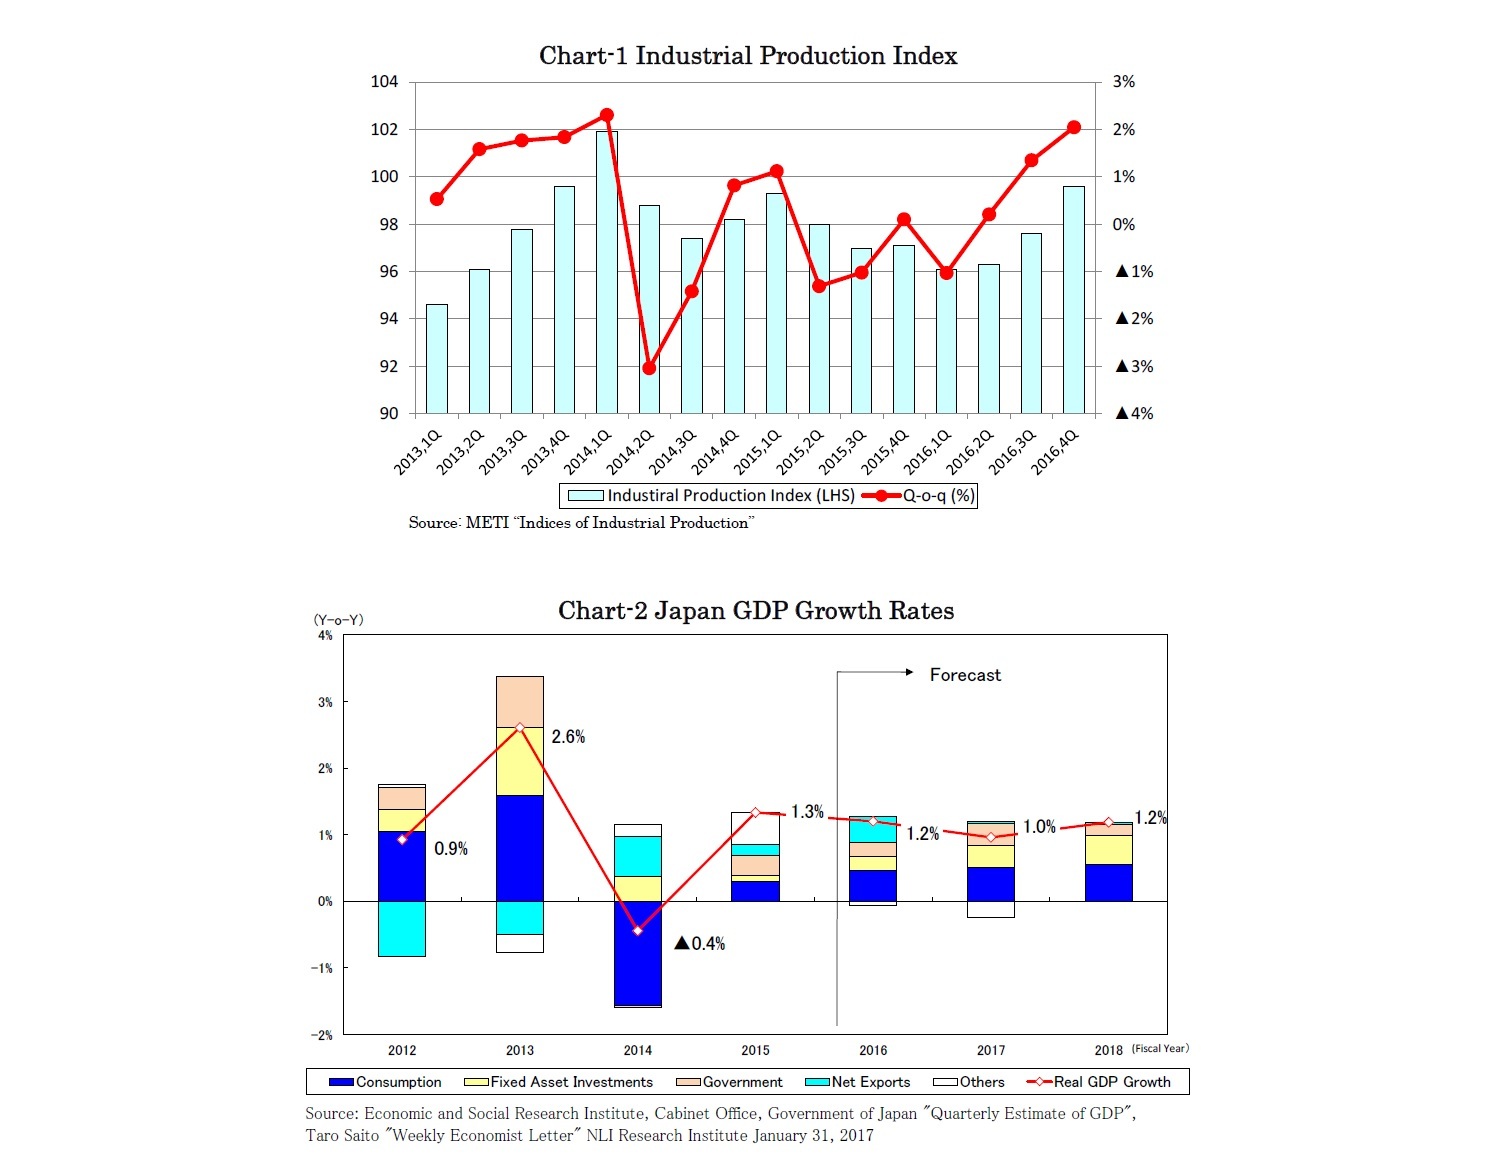 Chart-1 Industrial Production Index/Chart-2 Japan GDP Growth Rates